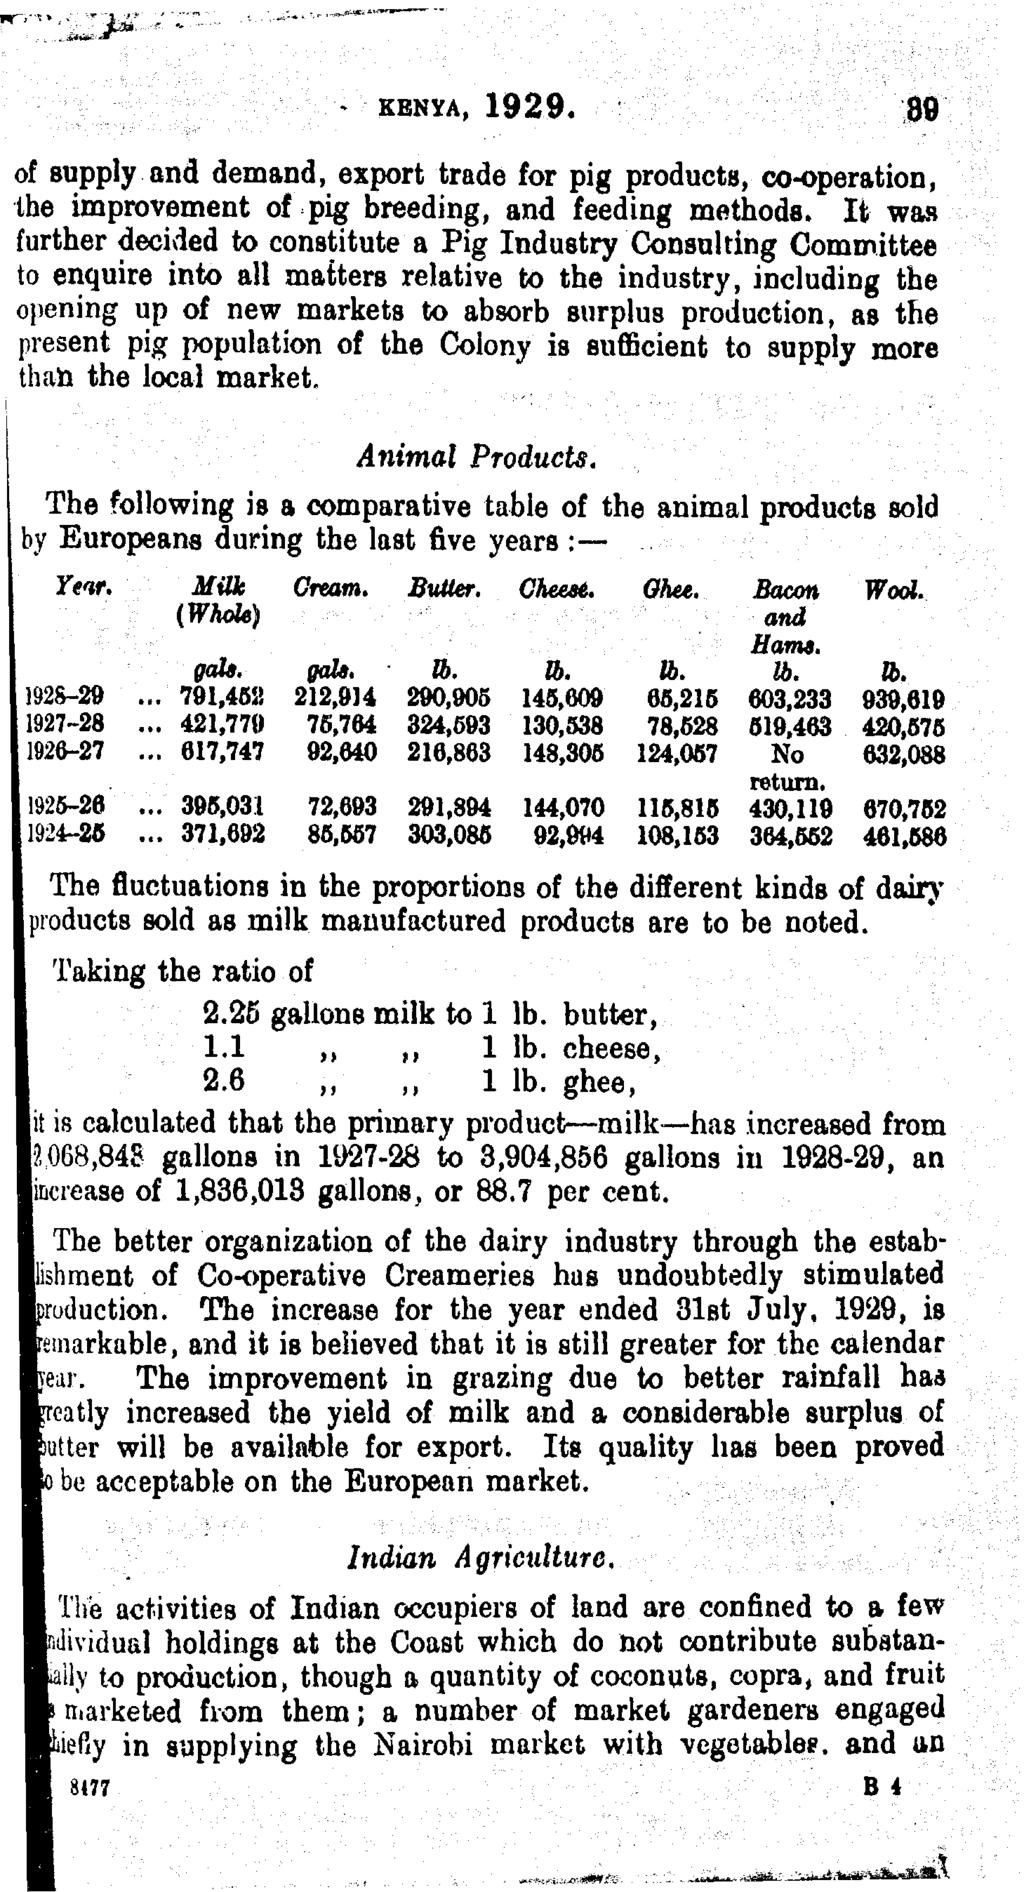 KENYA, 1929. 89 of supply and demand, export trade for pig products, co-operation, the improvement of pig breeding, and feeding methods.